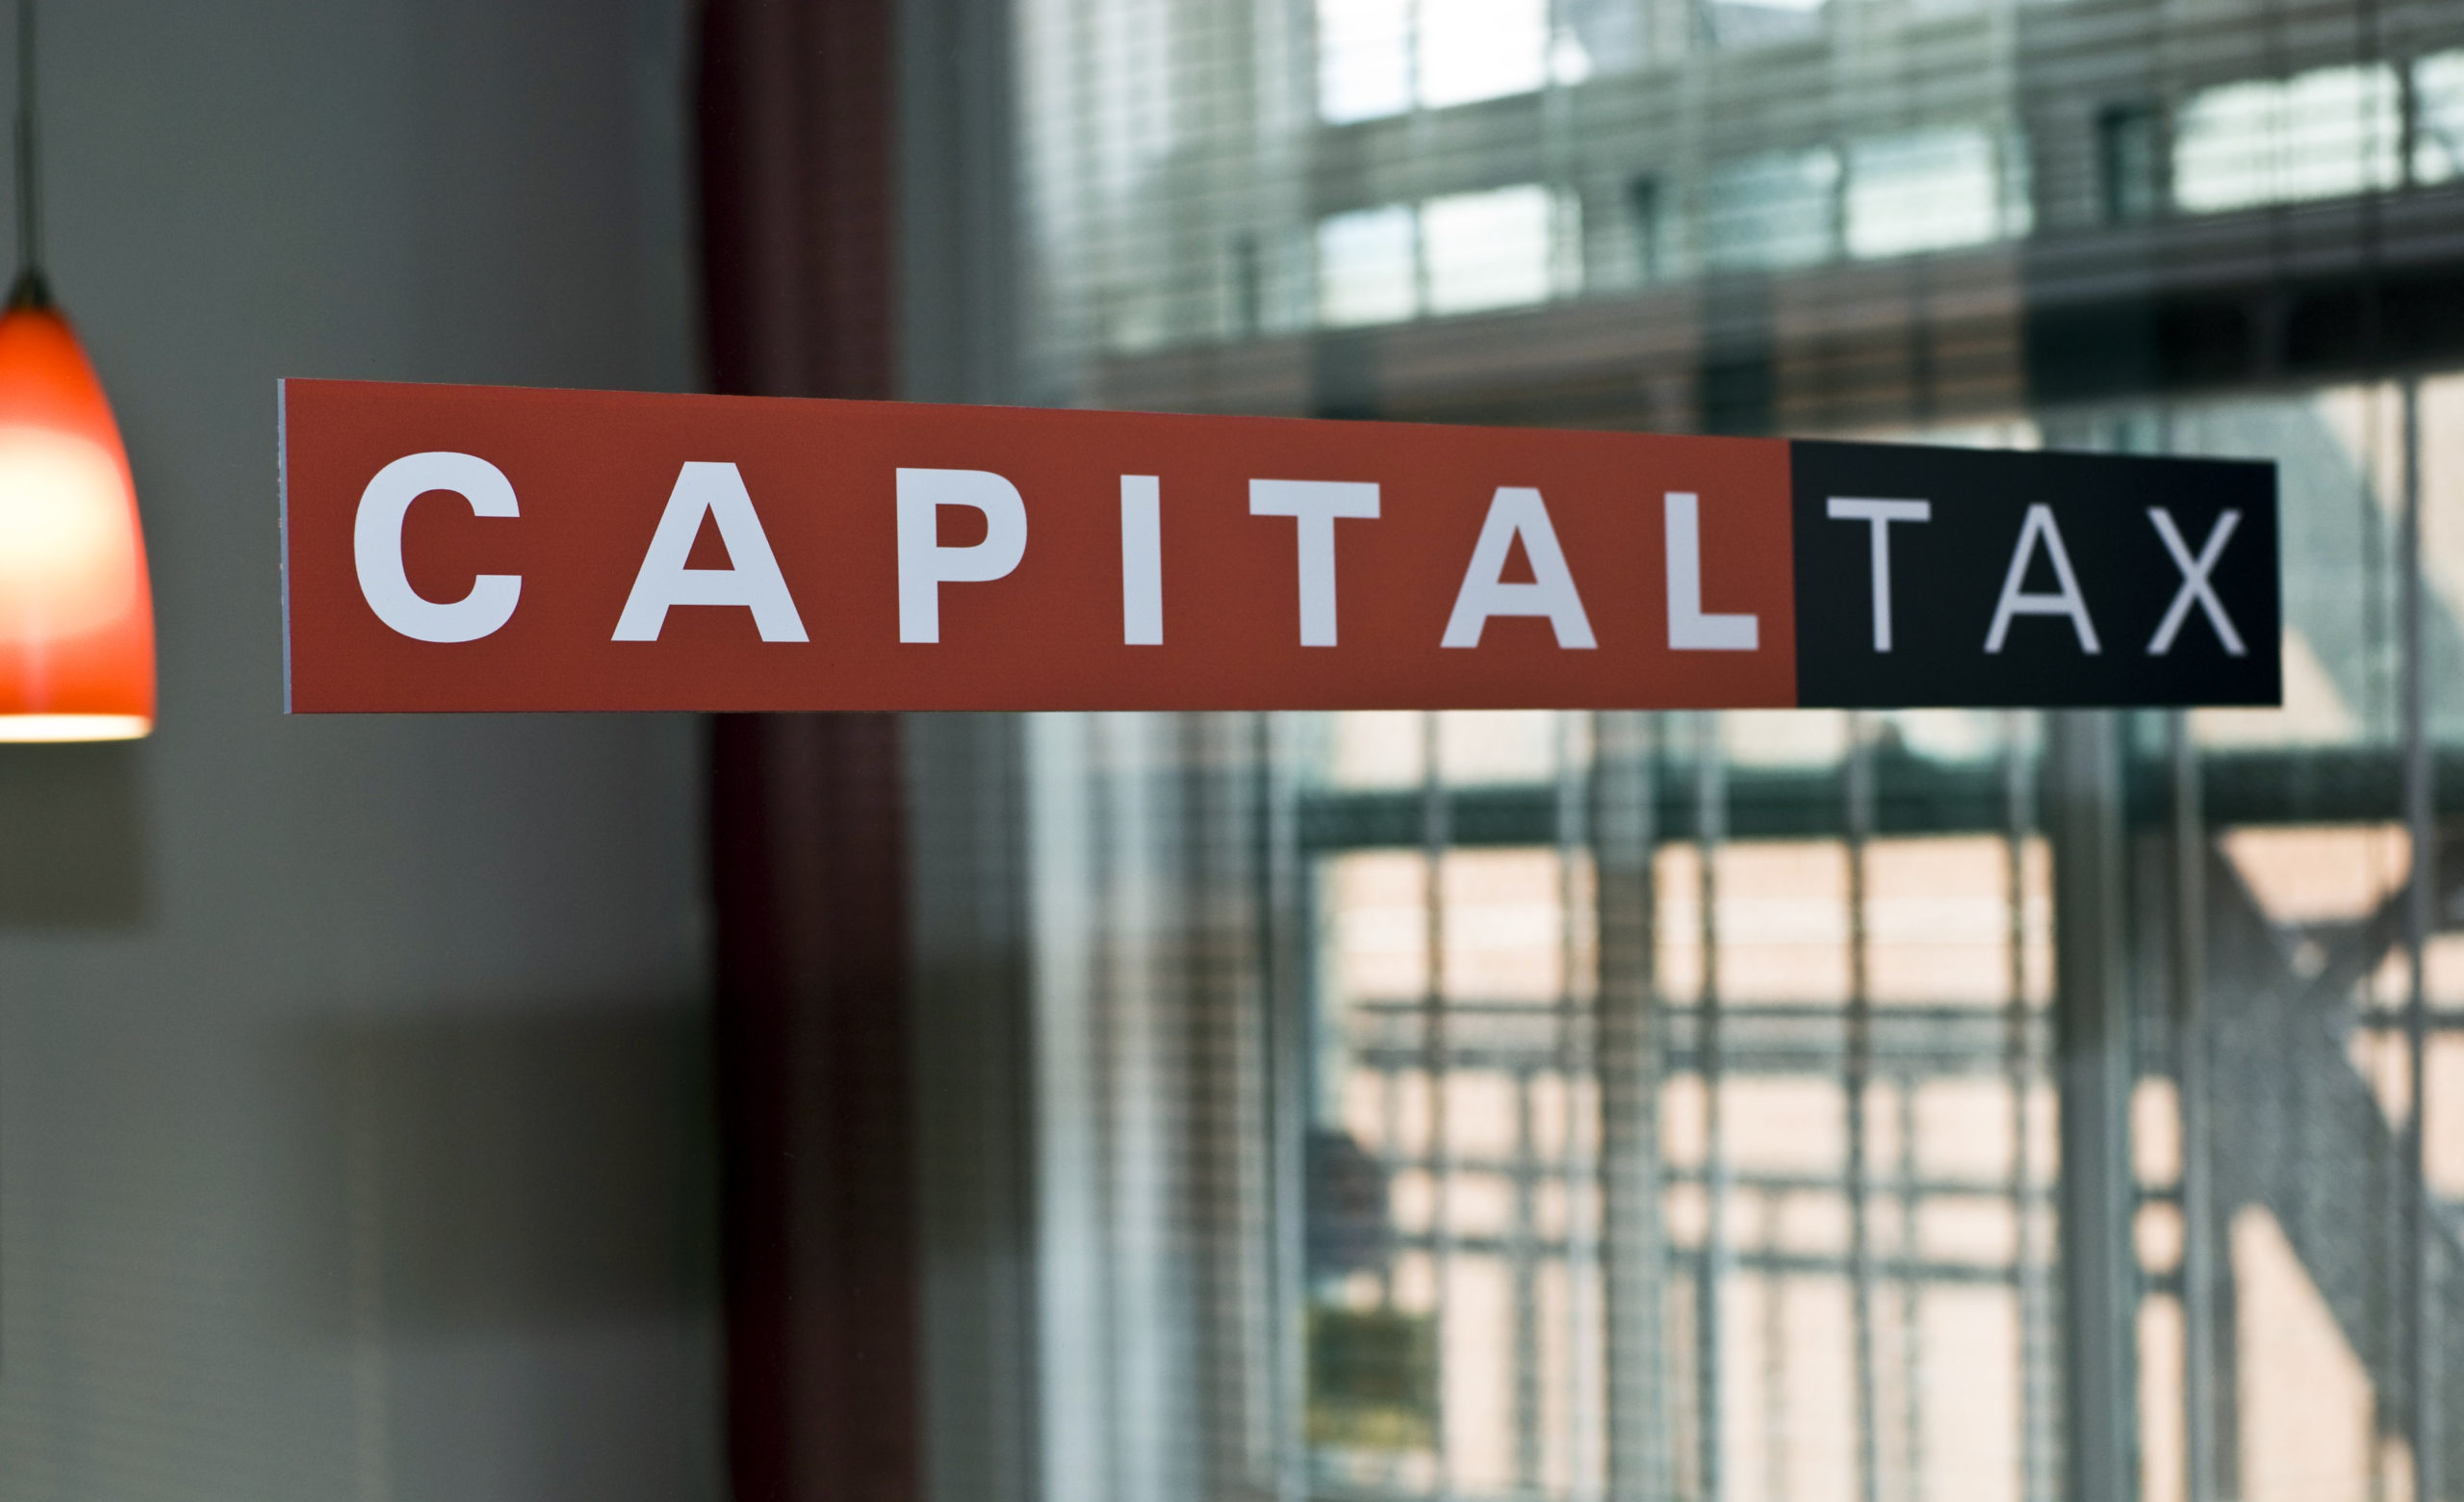 Capital Tax global offices